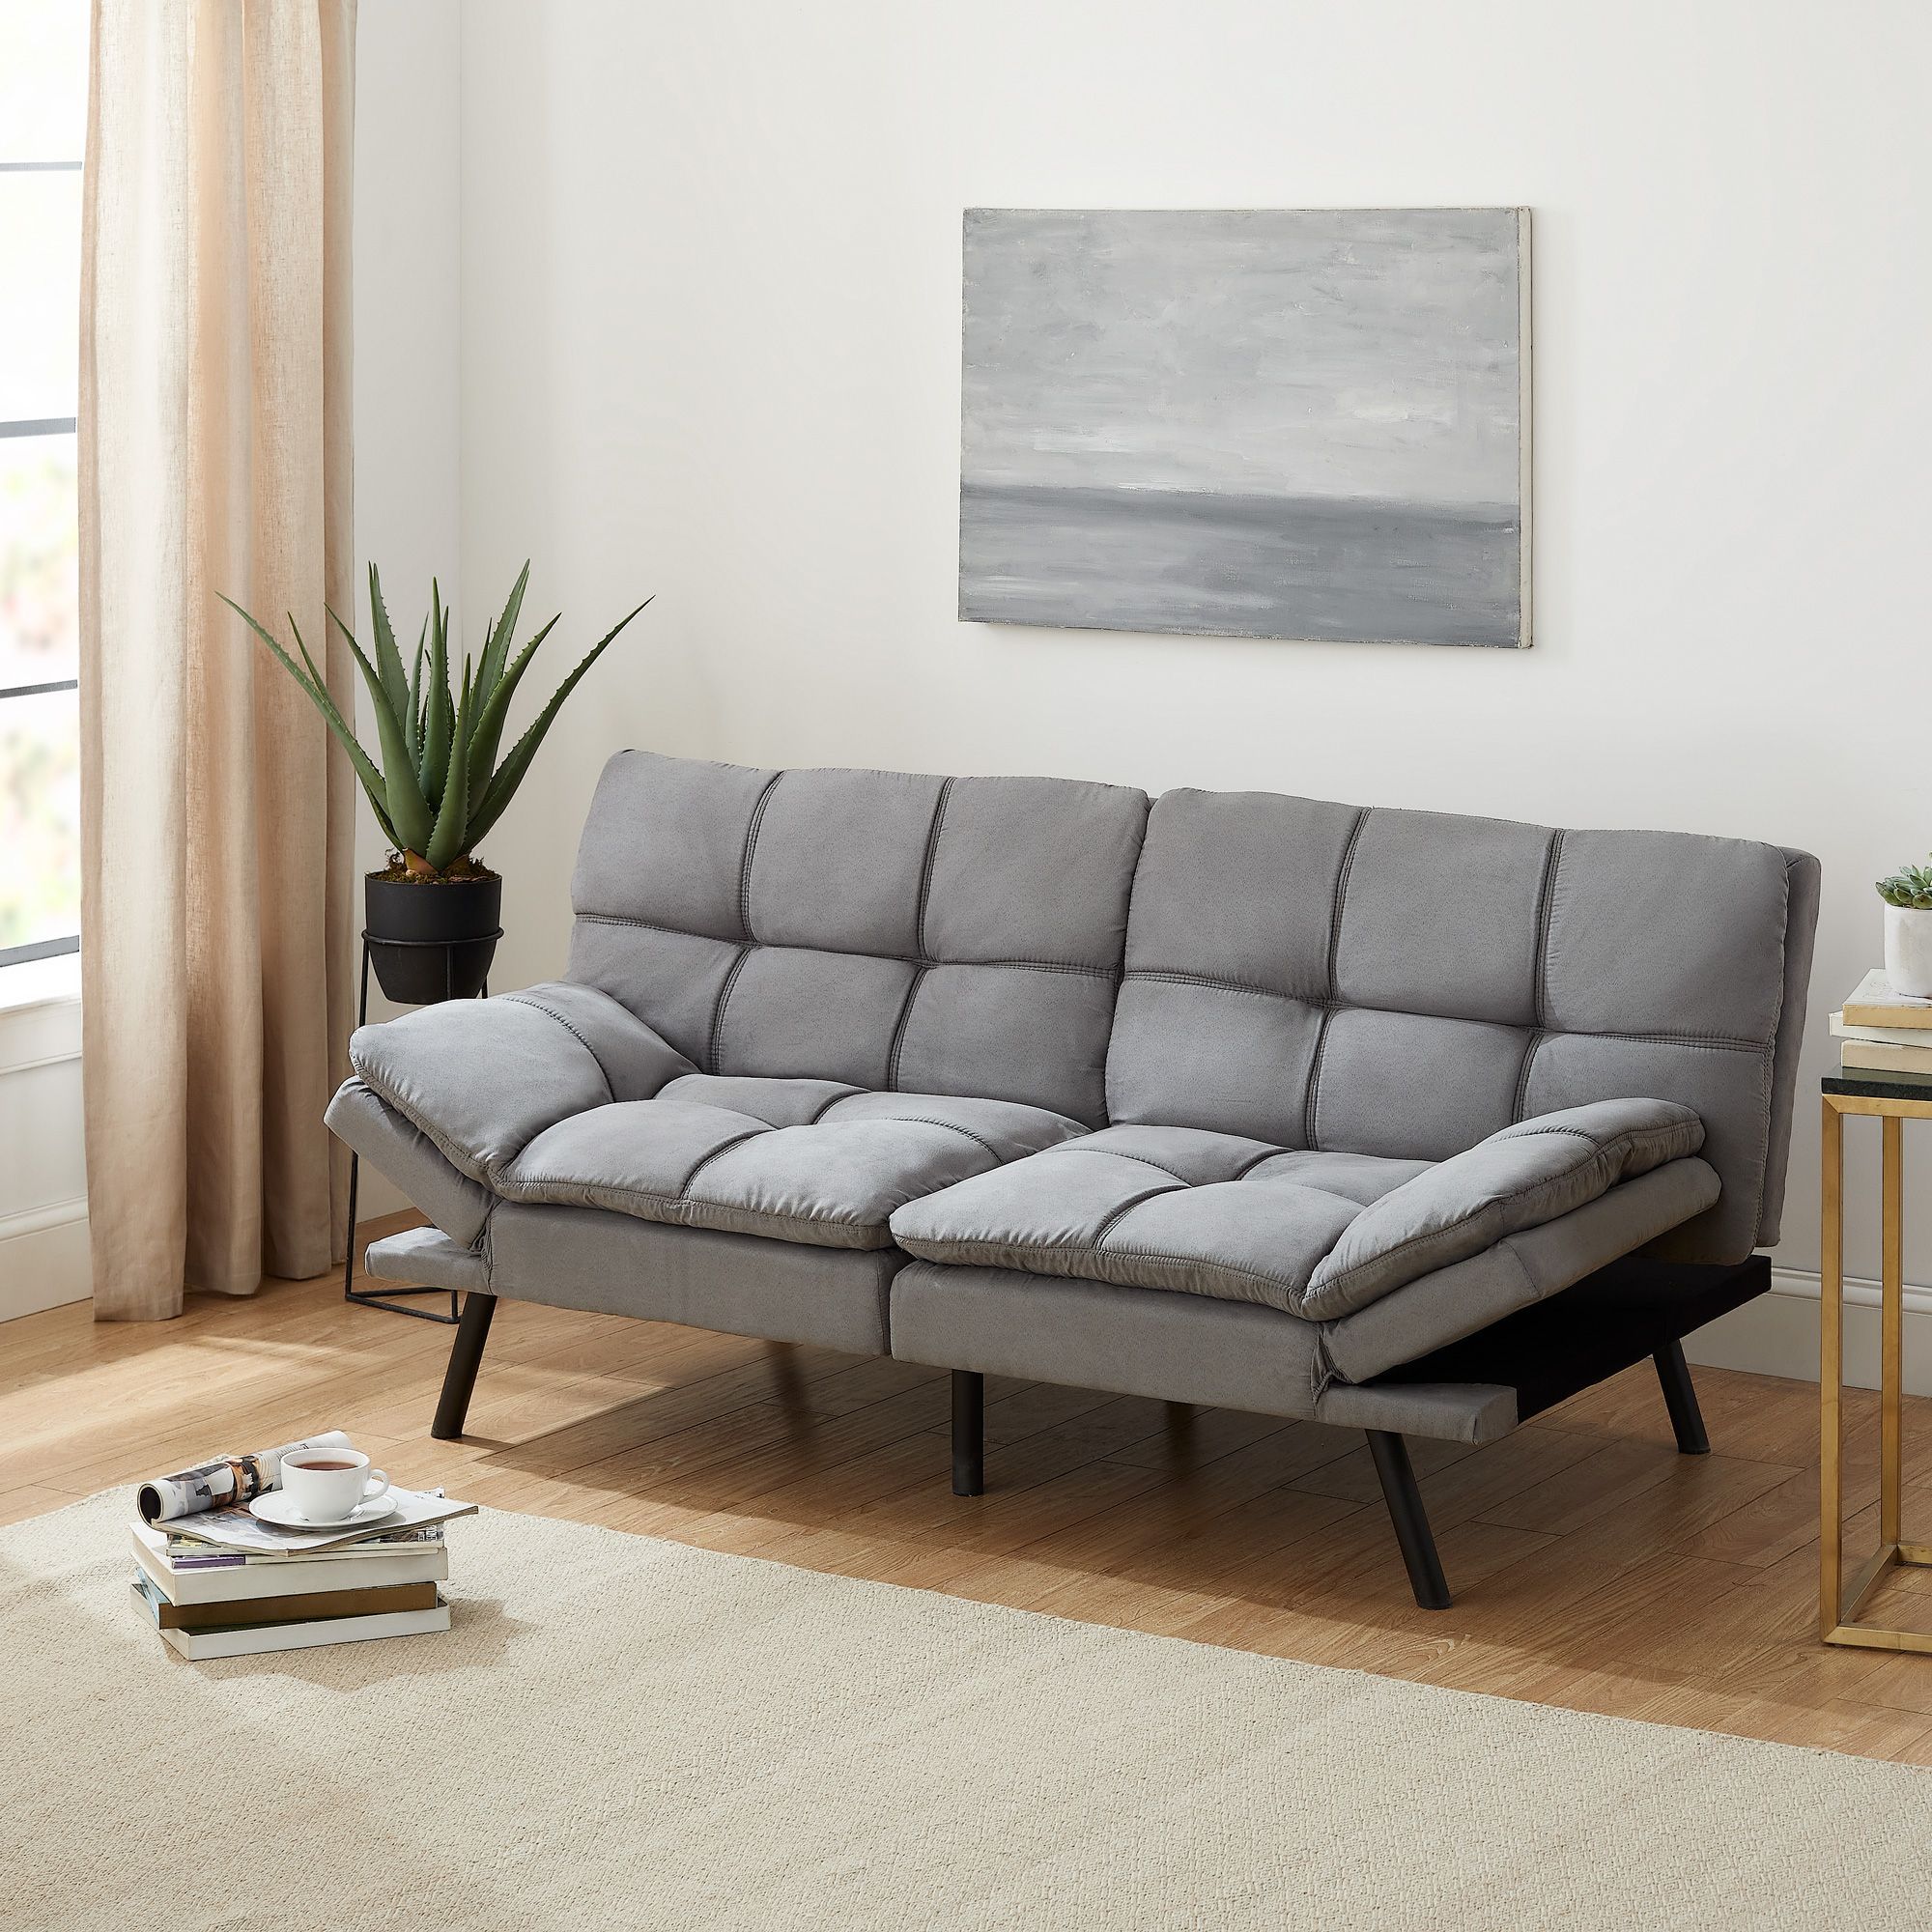 Mainstays Memory Foam Futon, Gray Suede Fabric, 72'' – Walmart Within Black Faux Suede Memory Foam Sofas (View 10 of 20)